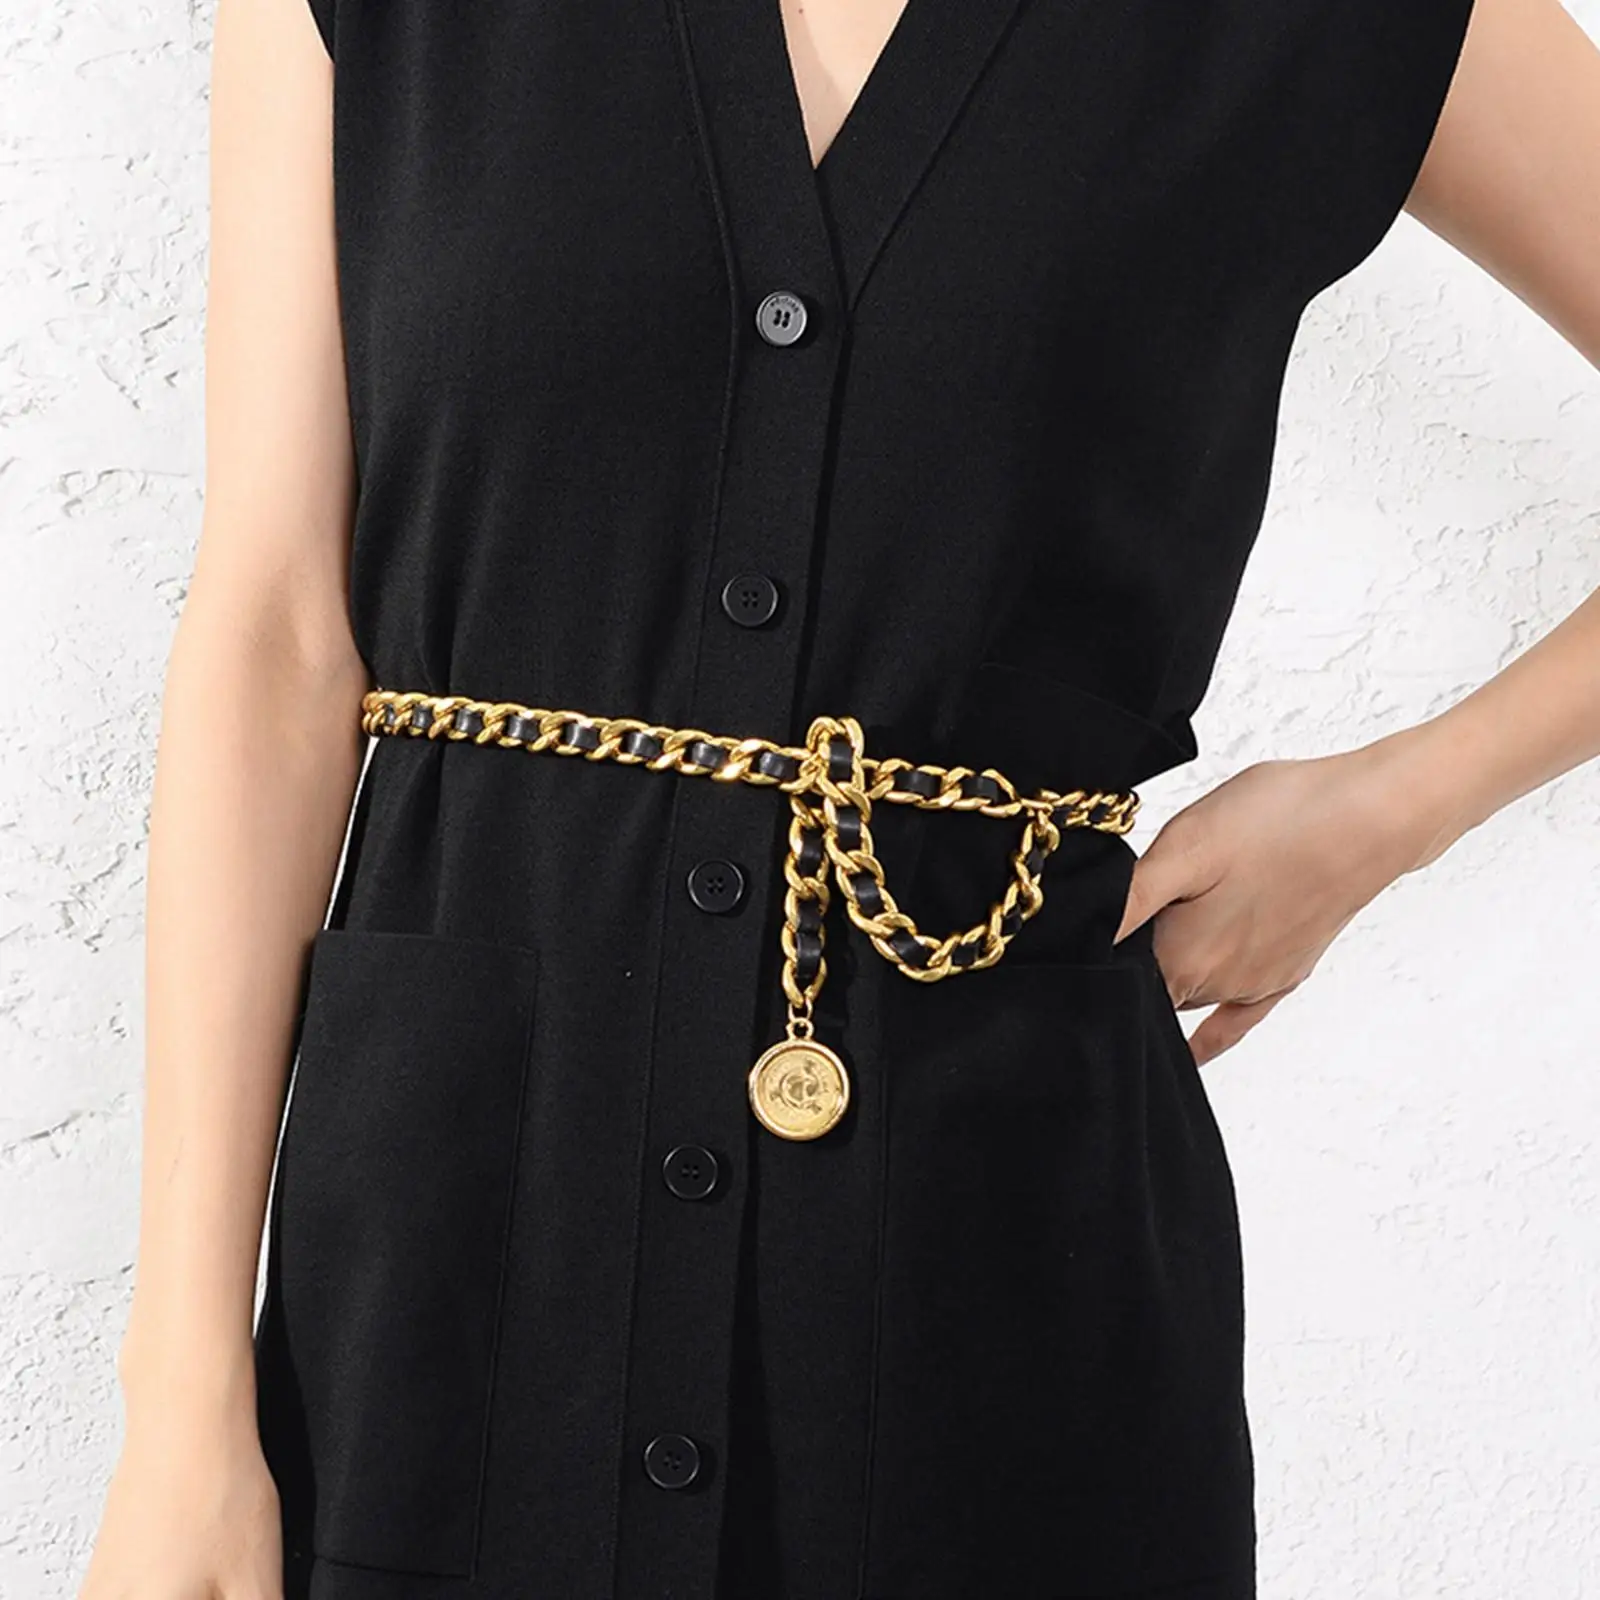 Waist Chain Belt Charms Accessories Jewelry Trendy Delicate Fashion Body Chain Waistband for Ladies Party Dresses Girls Sweater